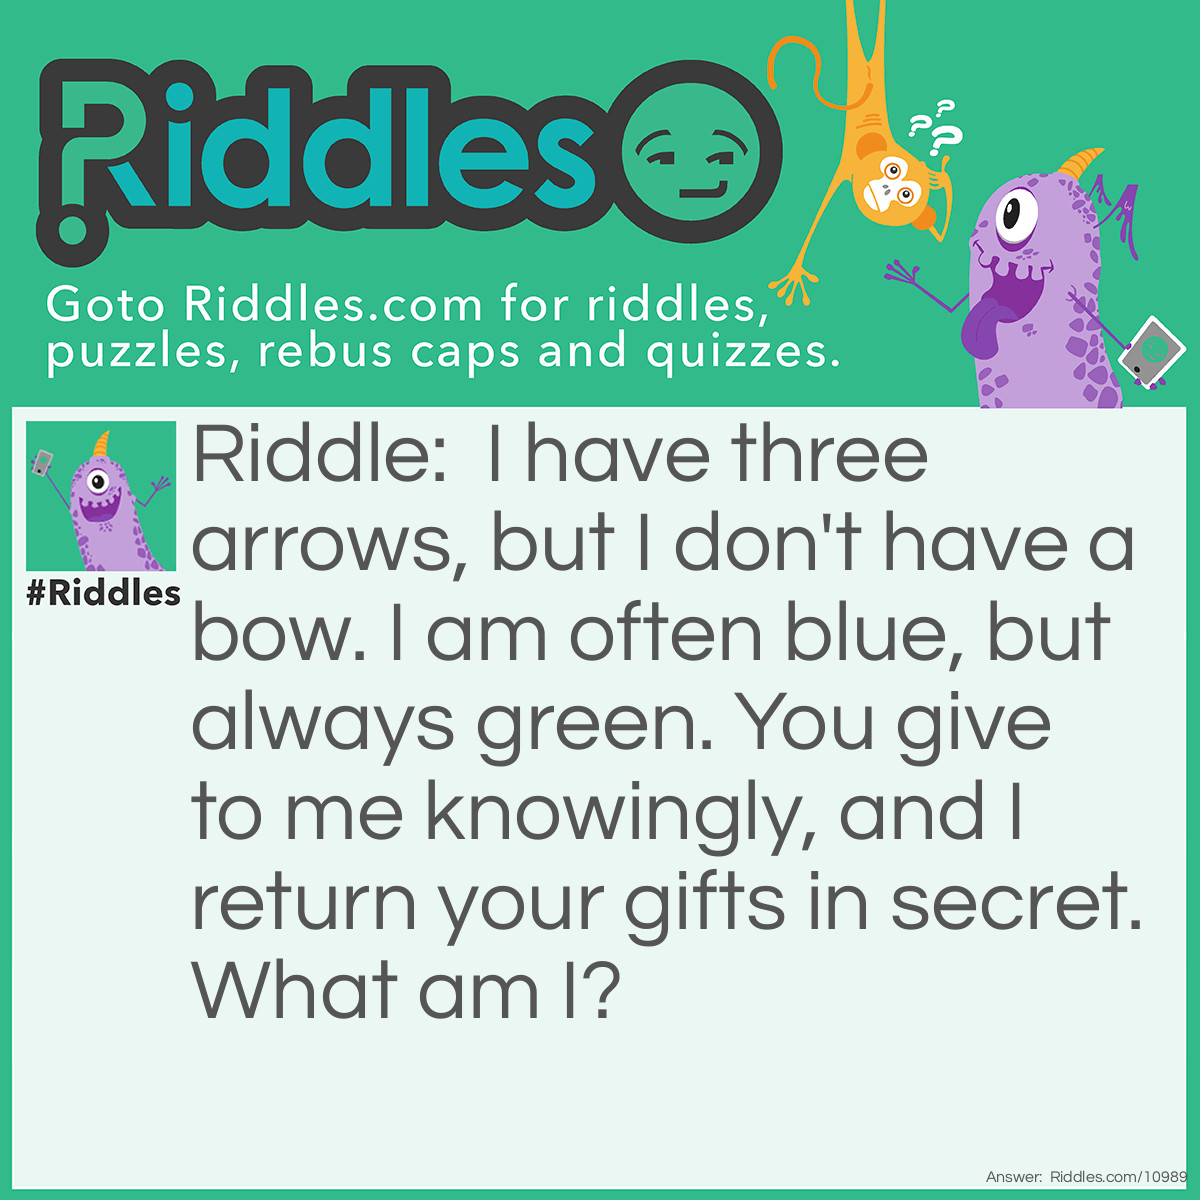 Riddle: I have three arrows, but I don't have a bow. I am often blue, but always green. You give to me knowingly, and I return your gifts in secret. What am I? Answer: A recycling bin.